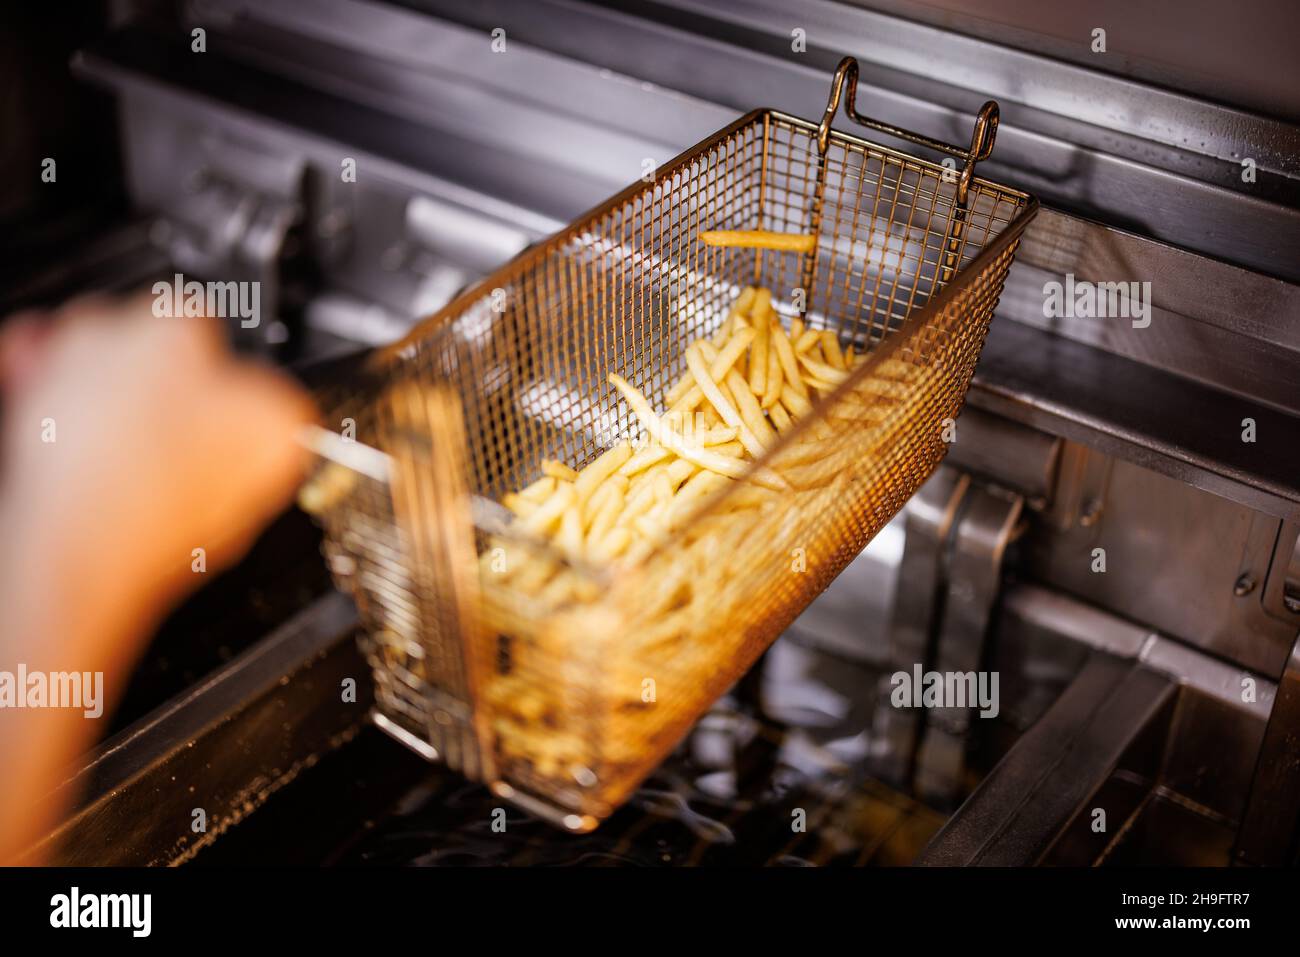 Munich, Germany. 02nd Dec, 2021. An employee takes a basket of French fries out of the fryer at a branch of the McDonald's fast food chain on Martin-Luther-Strasse in Giesing. The branch opened its doors on 4 December 1971 as the first McDonald's branch in Germany. Credit: Matthias Balk/dpa/Alamy Live News Stock Photo